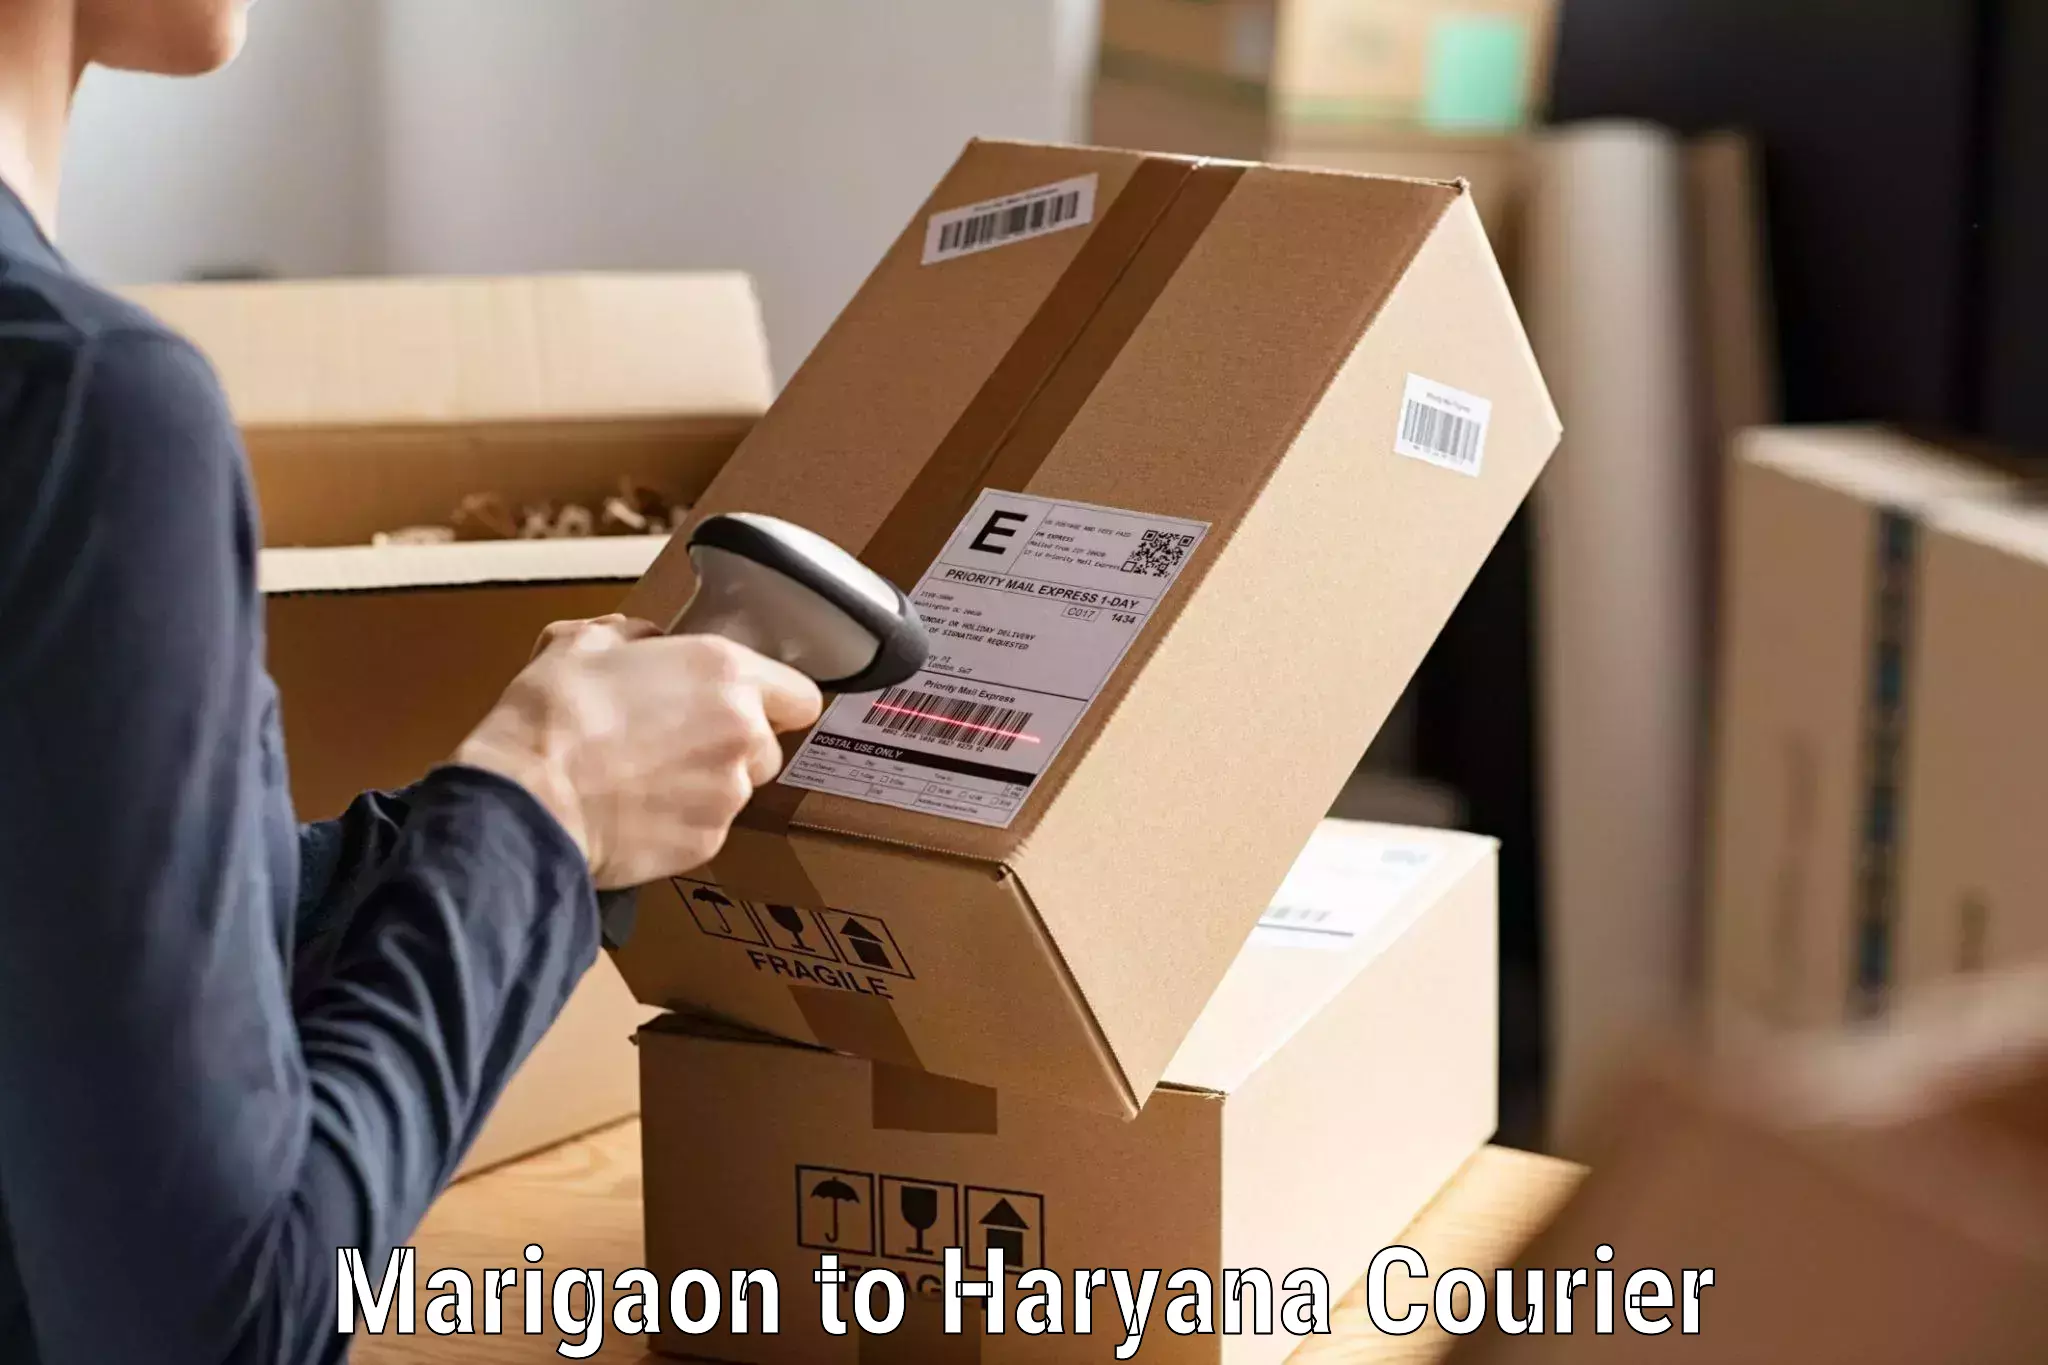 Cost-effective courier options Marigaon to Chaudhary Charan Singh Haryana Agricultural University Hisar